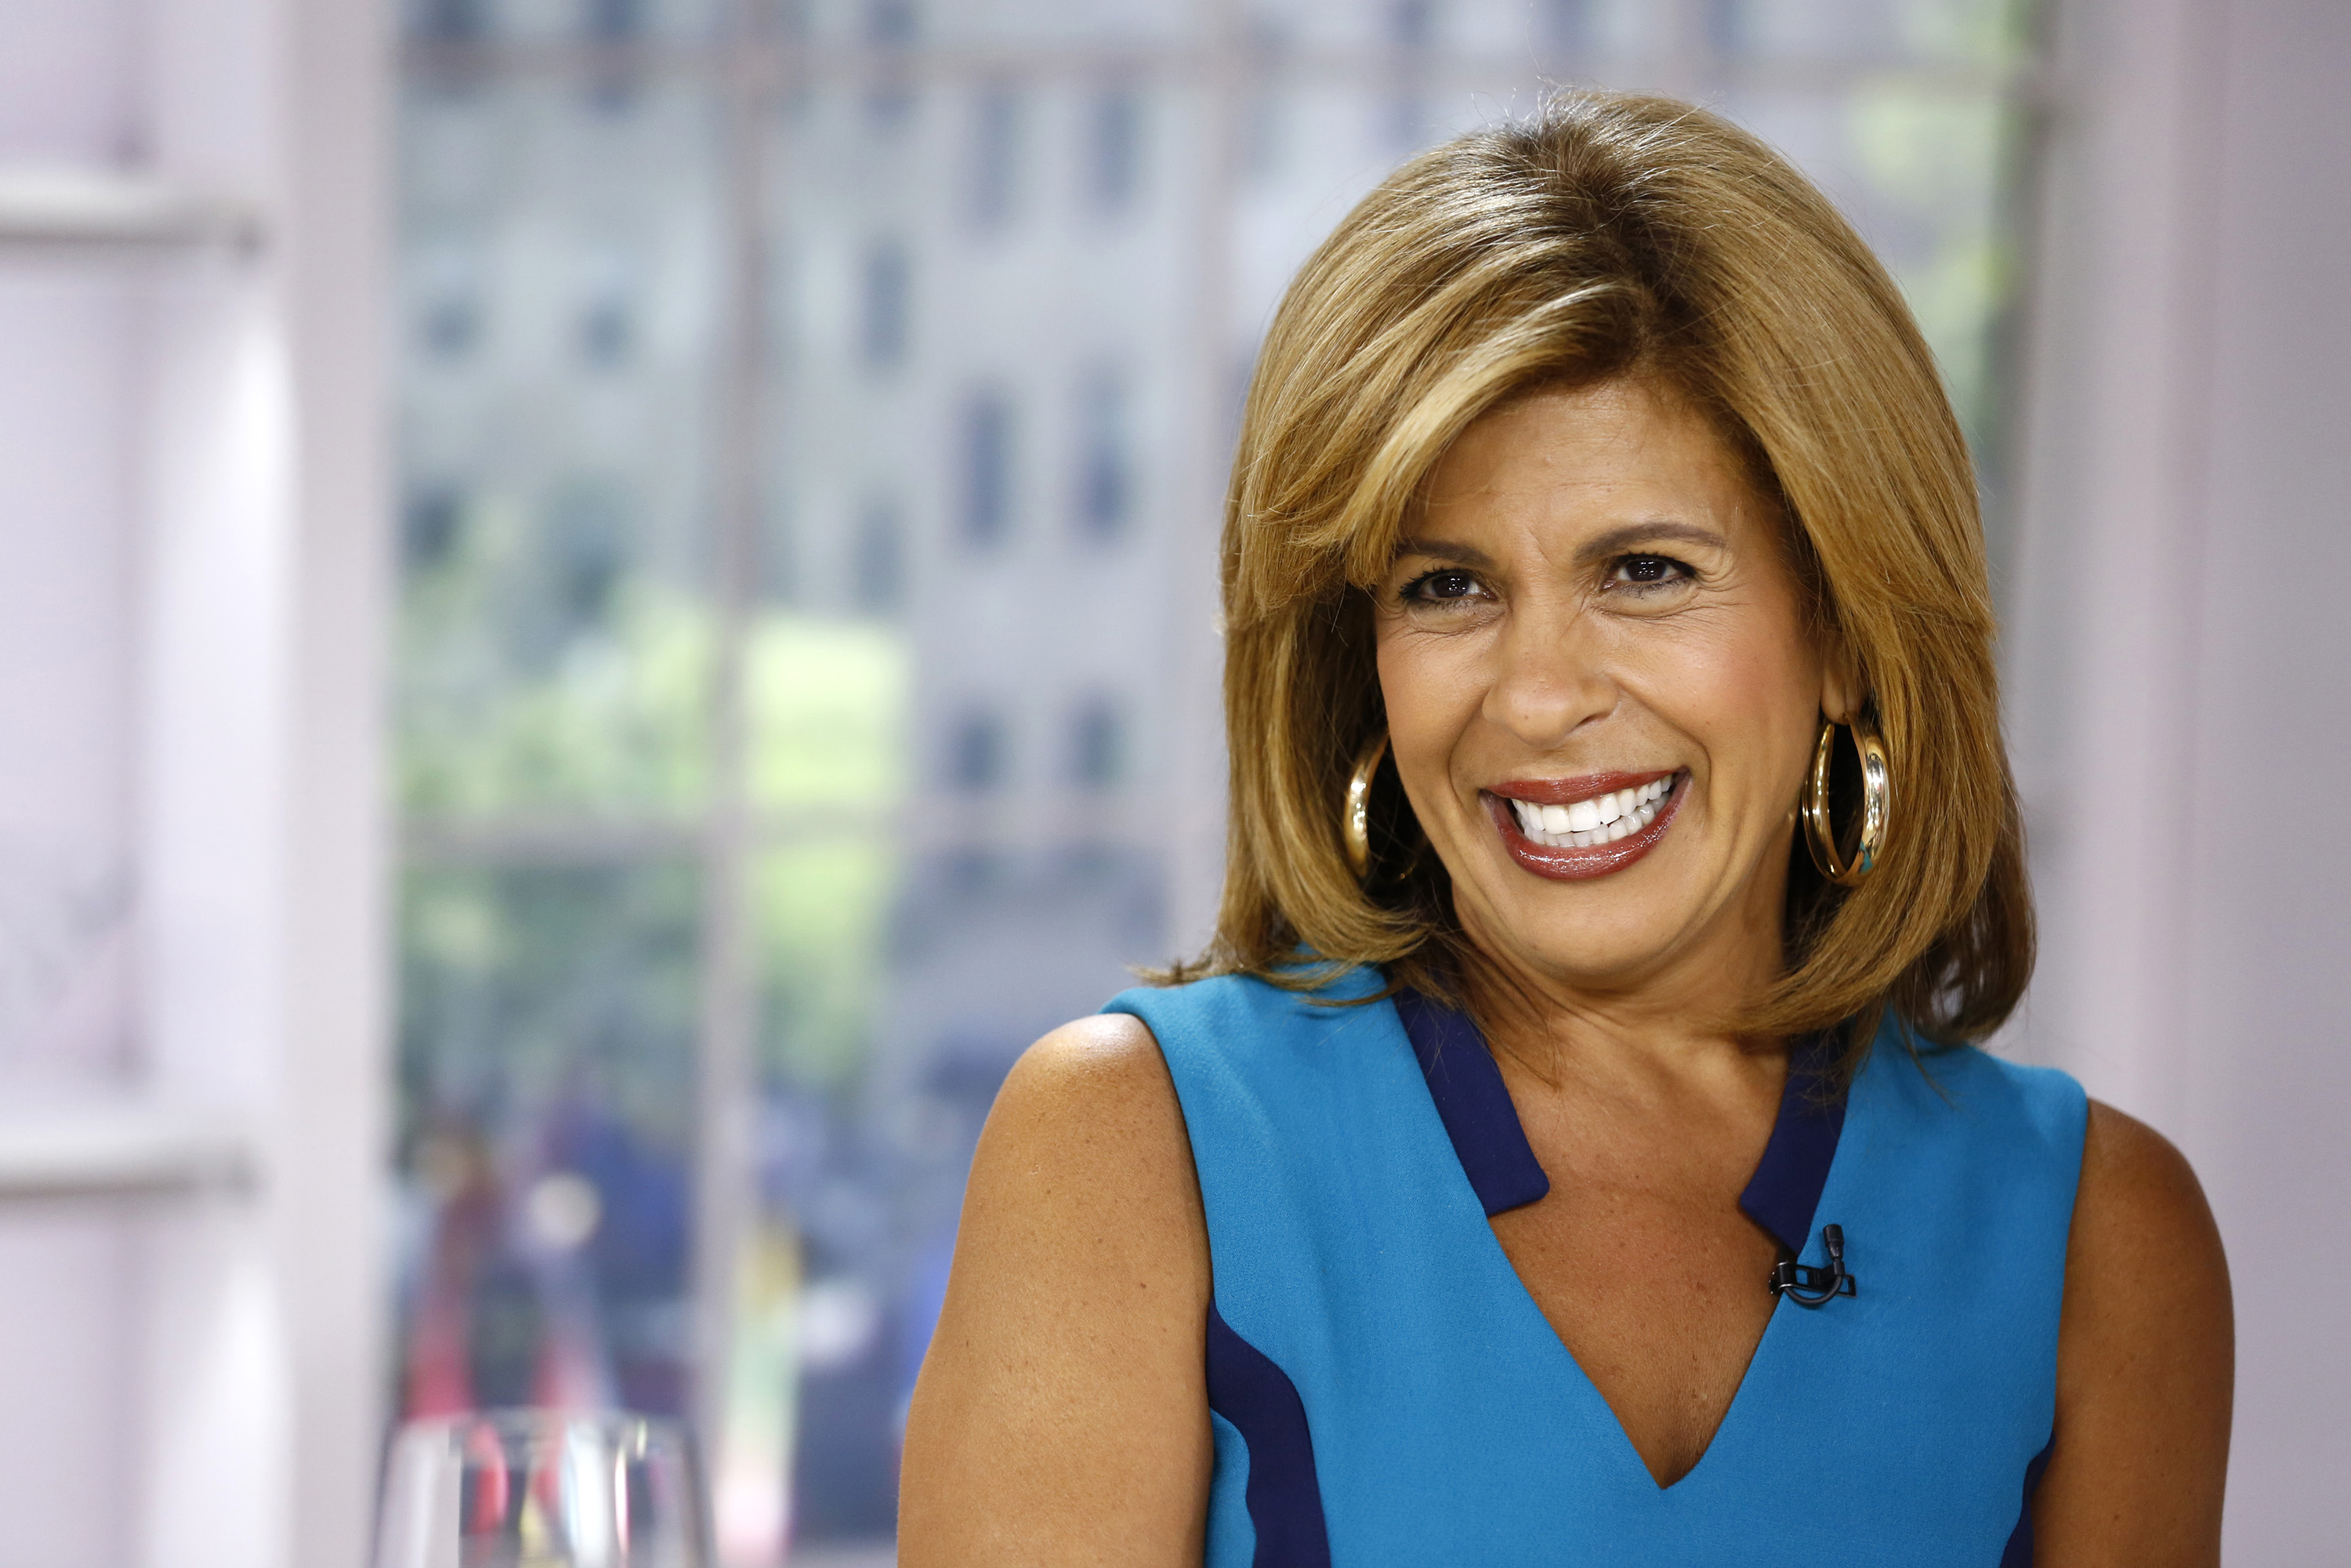 What Are the Today Show Cast Members' Net Worths?